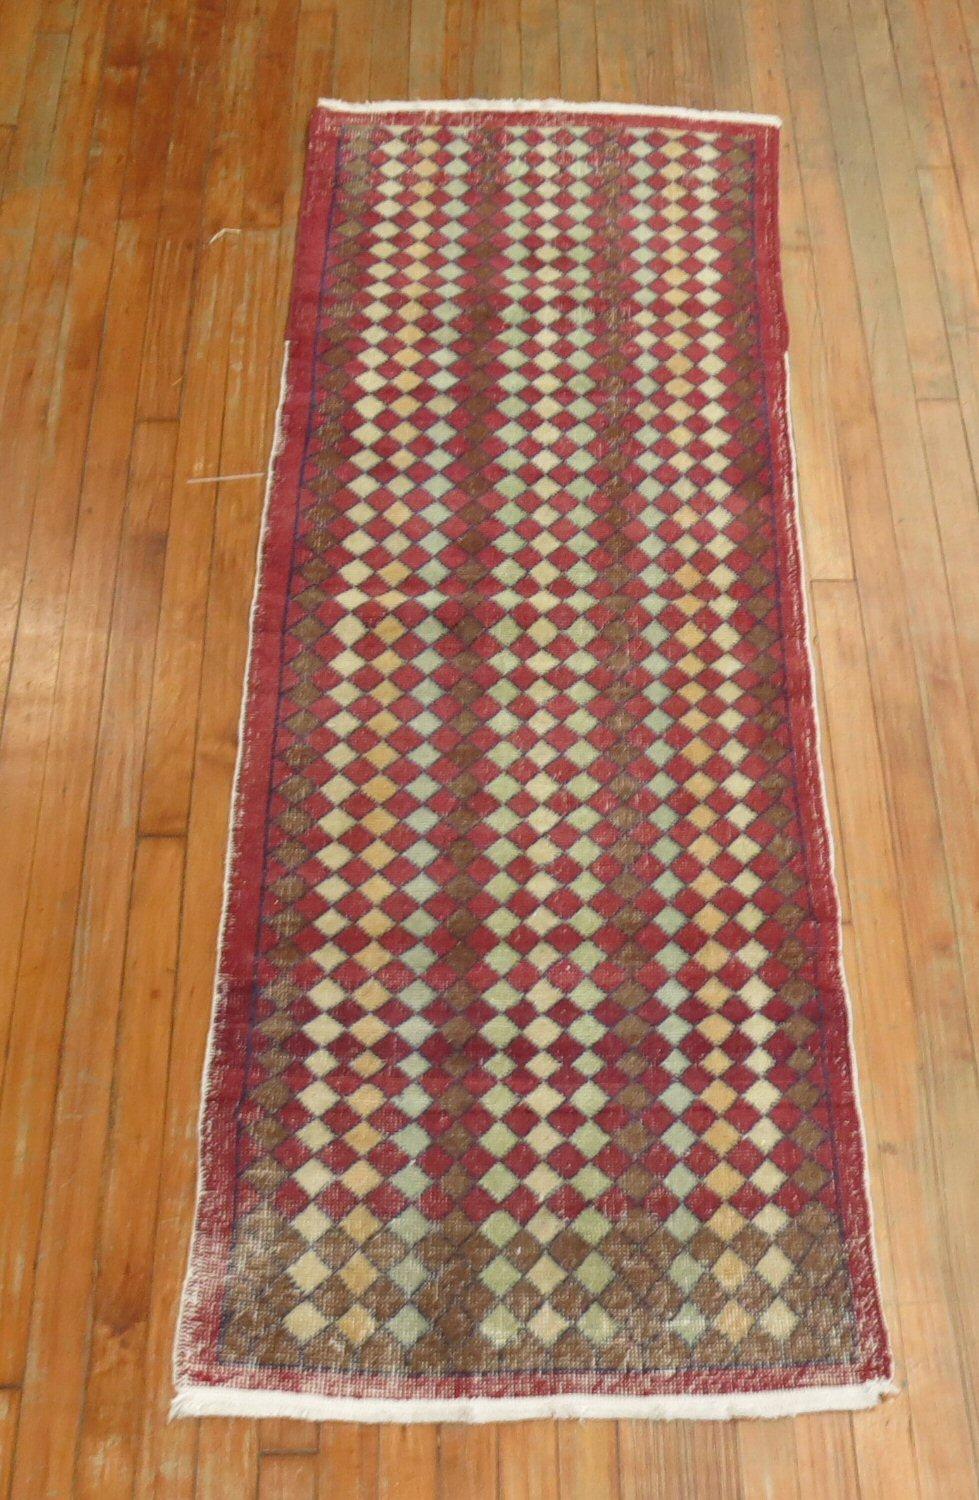 Crimson red Turkish deco runner from the mid-20th century with an all-over repetitive design of small diamonds throughout. So Shic. Shabby chic!